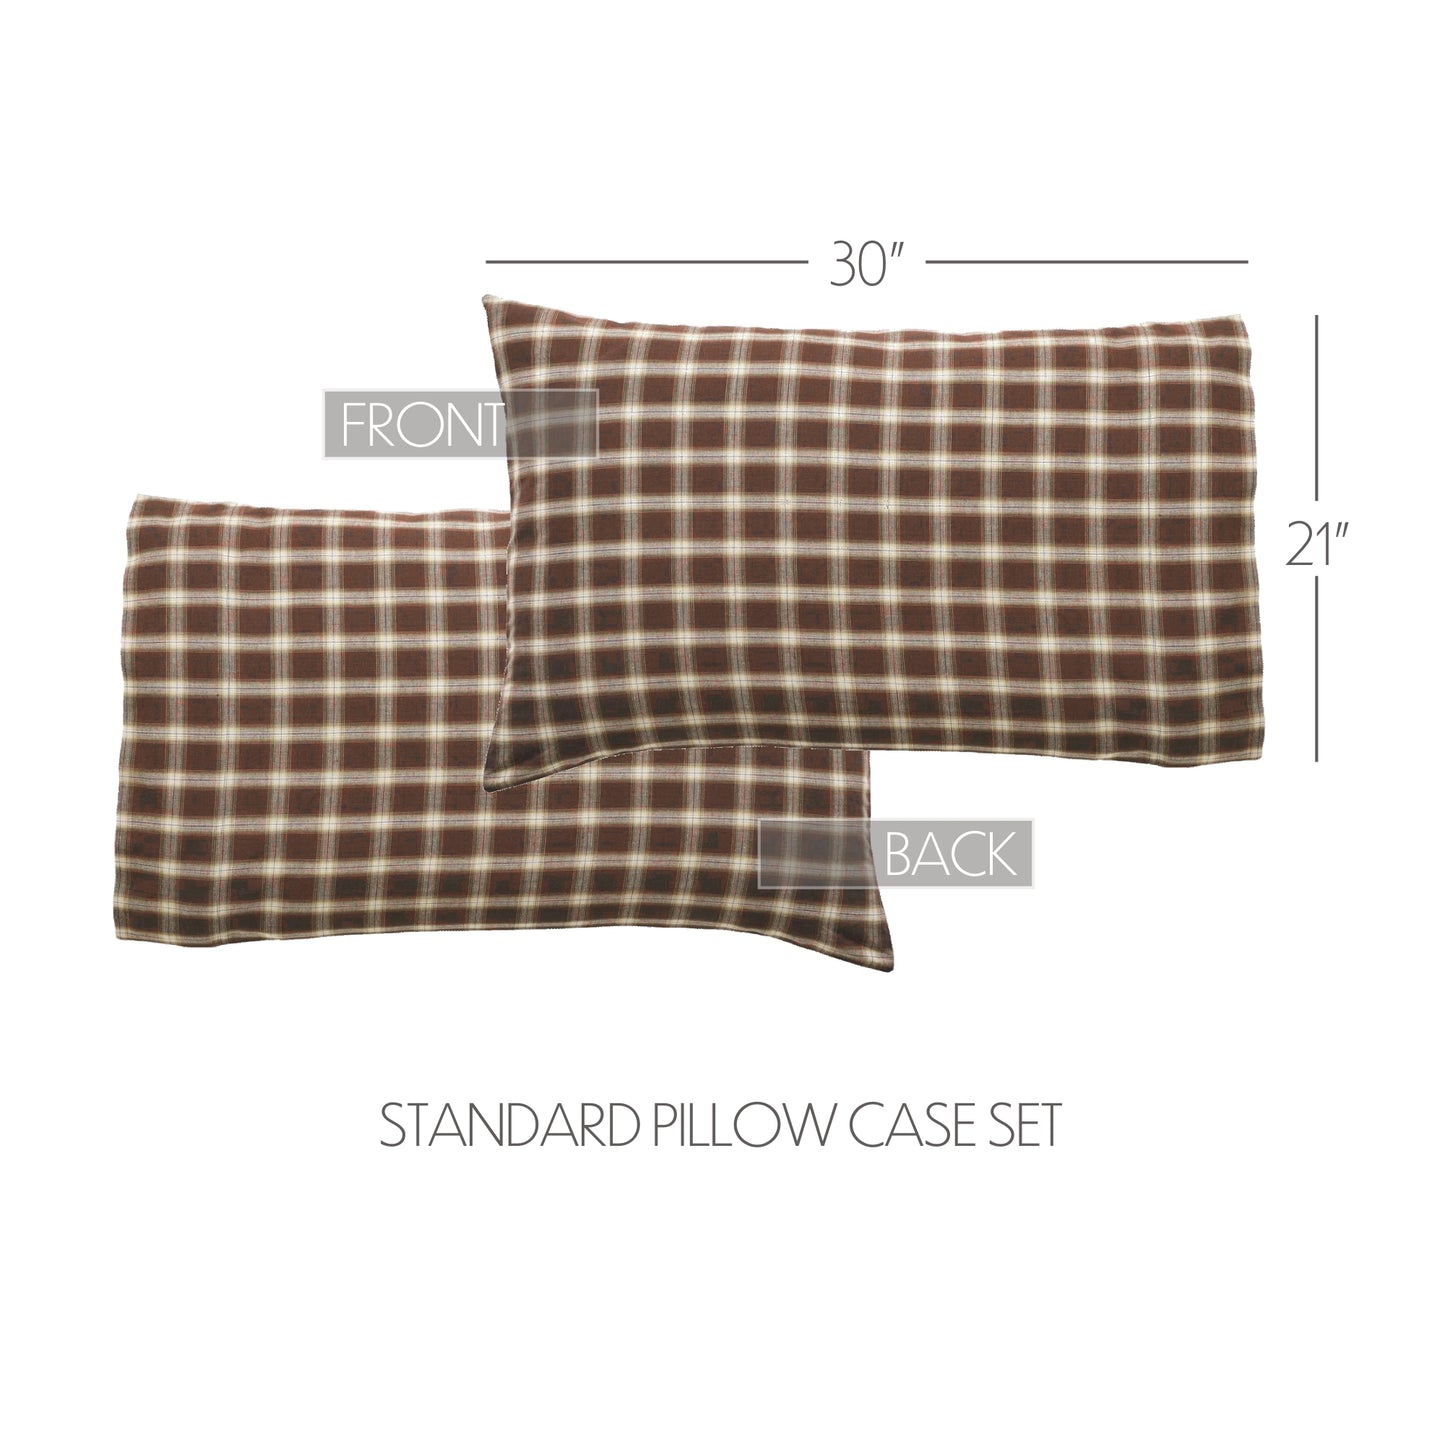 34345-Rory-Standard-Pillow-Case-Set-of-2-21x30-image-1